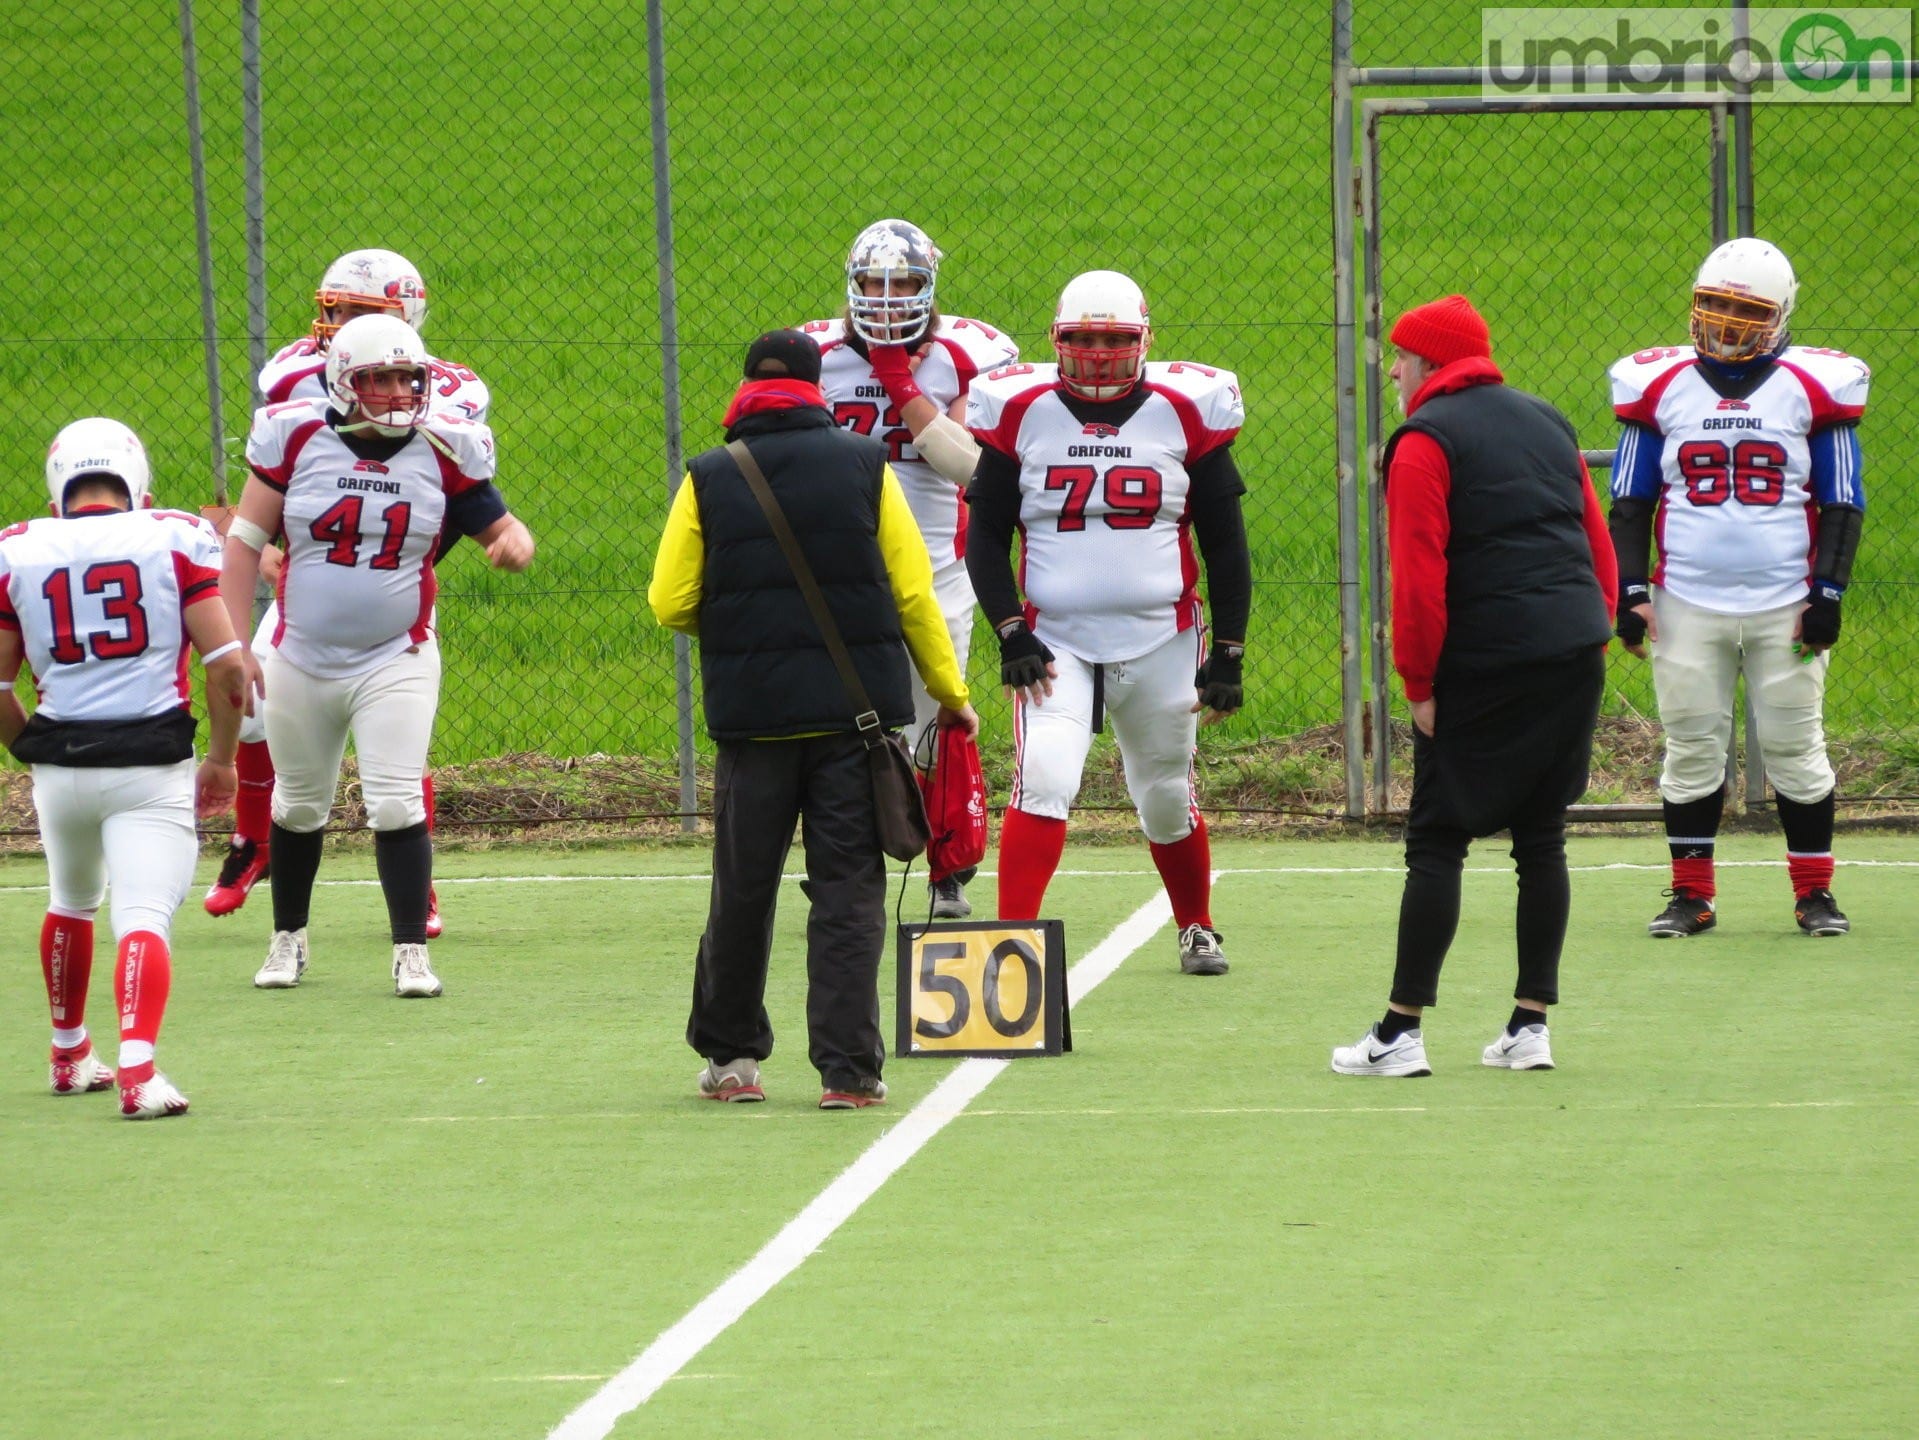 steelers grifoni football85 | umbriaON